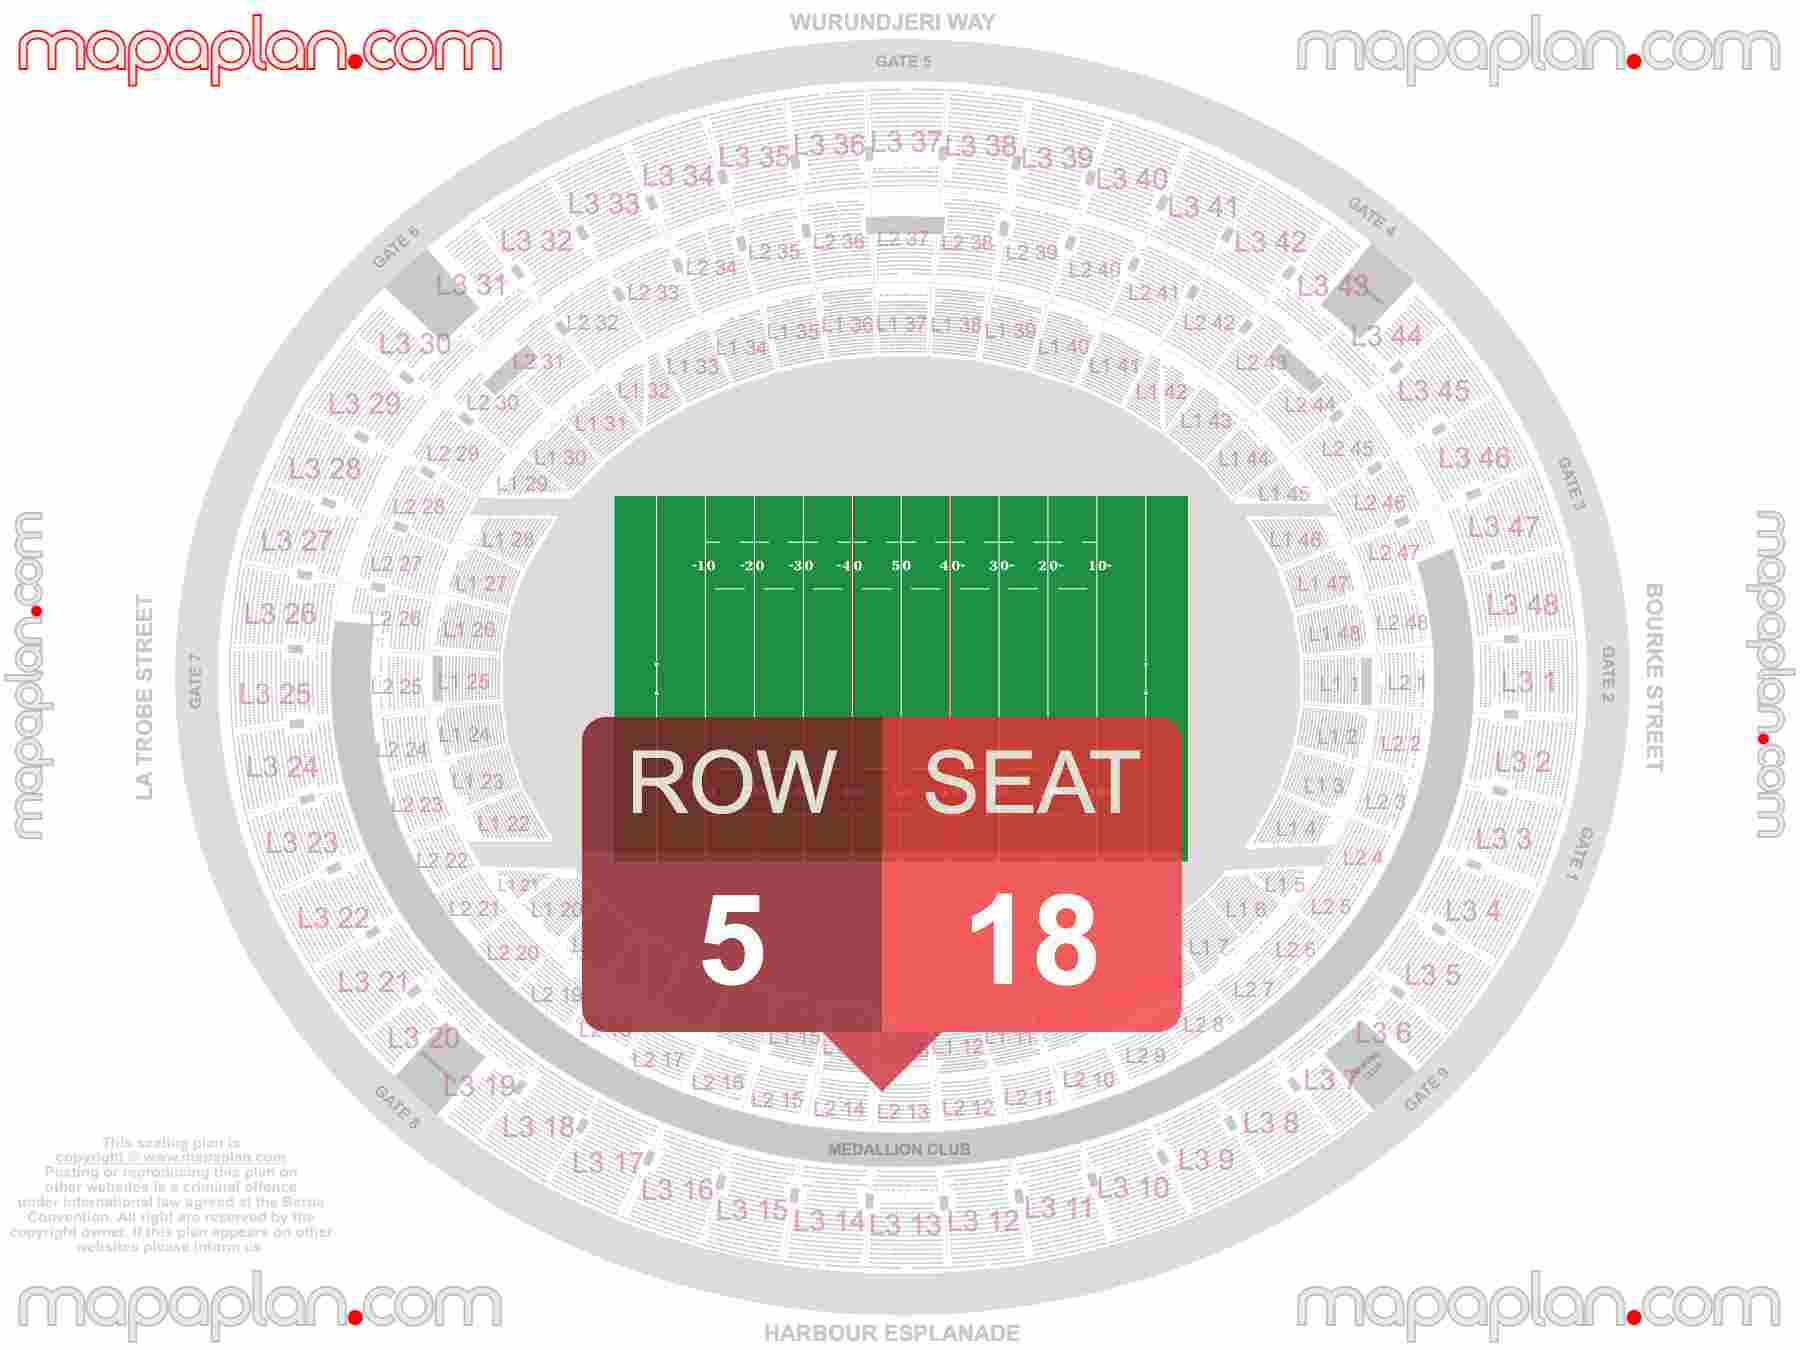 Melbourne Marvel Stadium seating map Rugby seating map with exact section numbers showing best rows and seats selection 3d layout - Best interactive seat finder tool with precise detailed location data